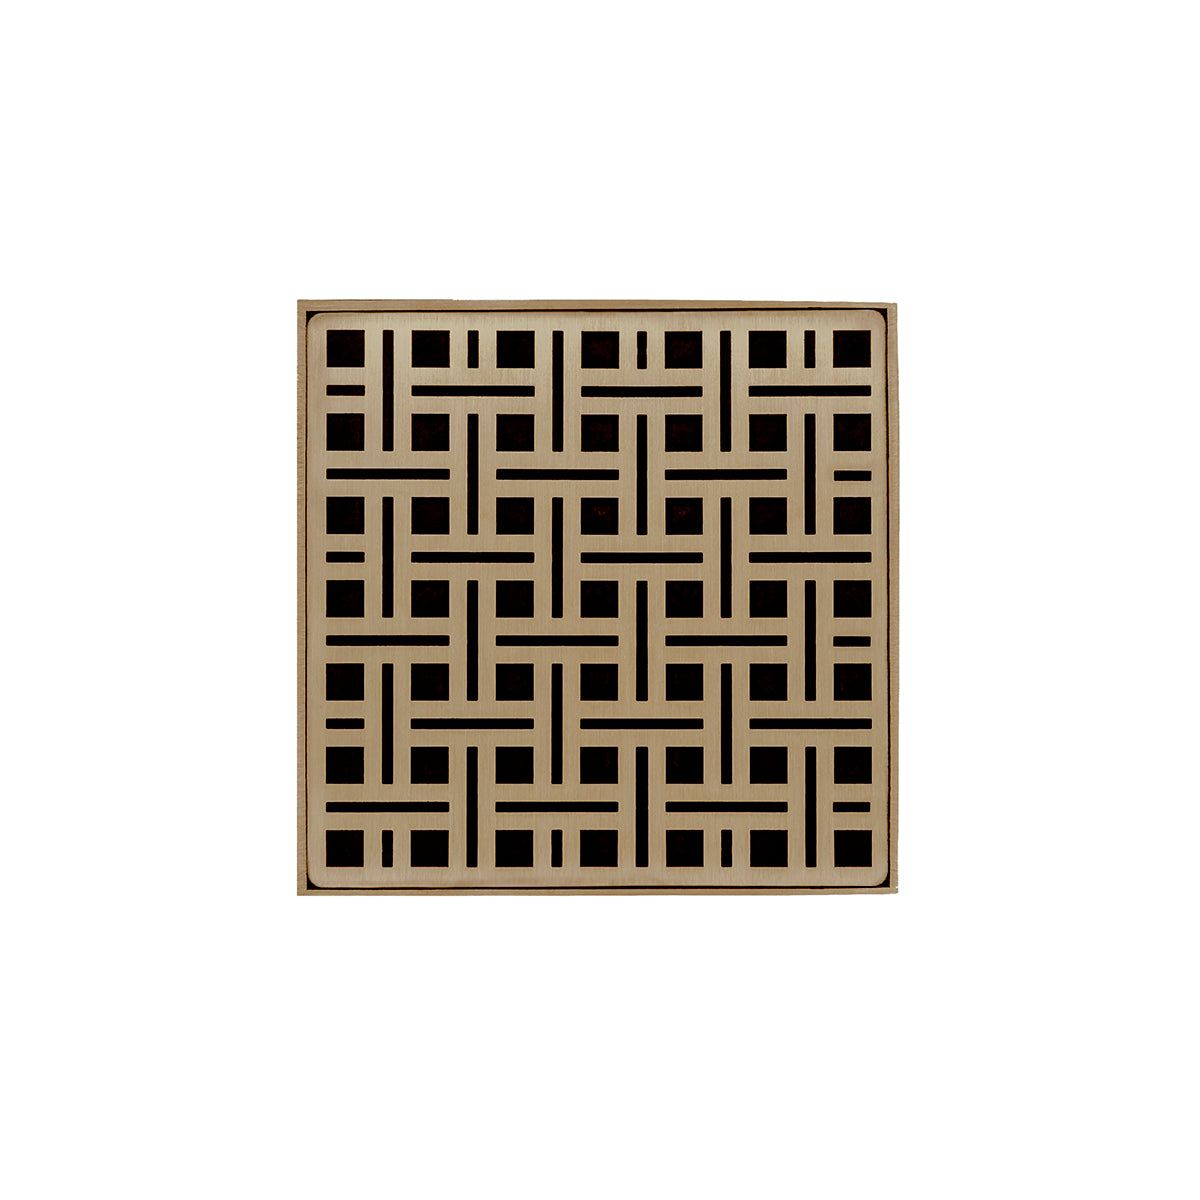 Infinity Drain 5" x 5" VDB 5 Premium Center Drain Kit with Weave Pattern Decorative Plate with ABS Bonded Flange Drain Body, 2", 3" and 4" Outlet